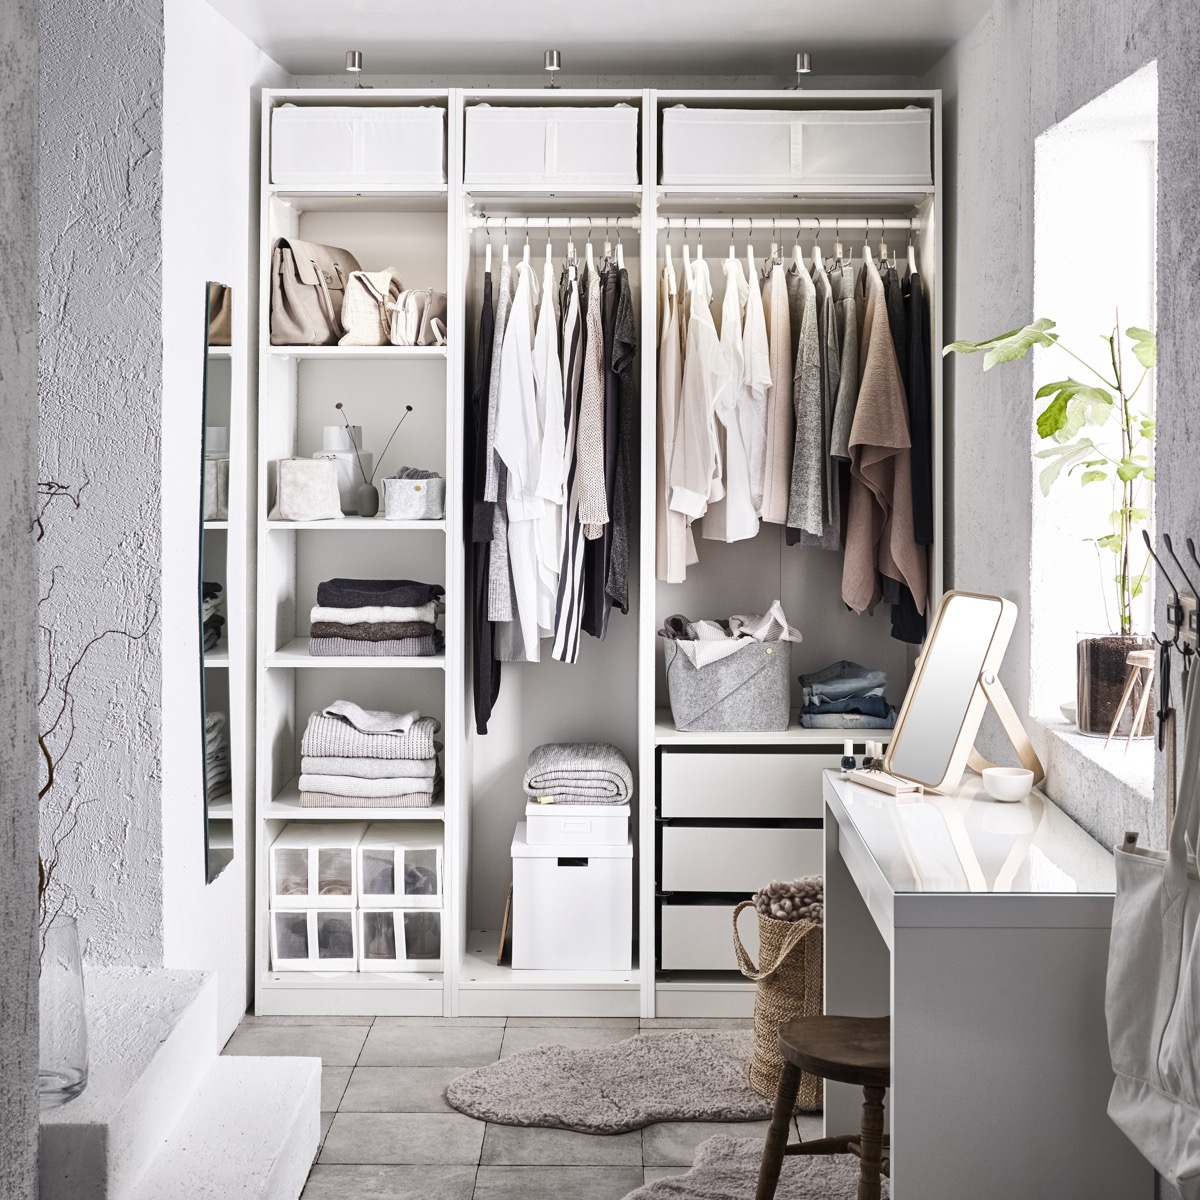 40 Walk In Wardrobes That Will Give You Deep Closet Envy,Free Elephant Embroidery Designs